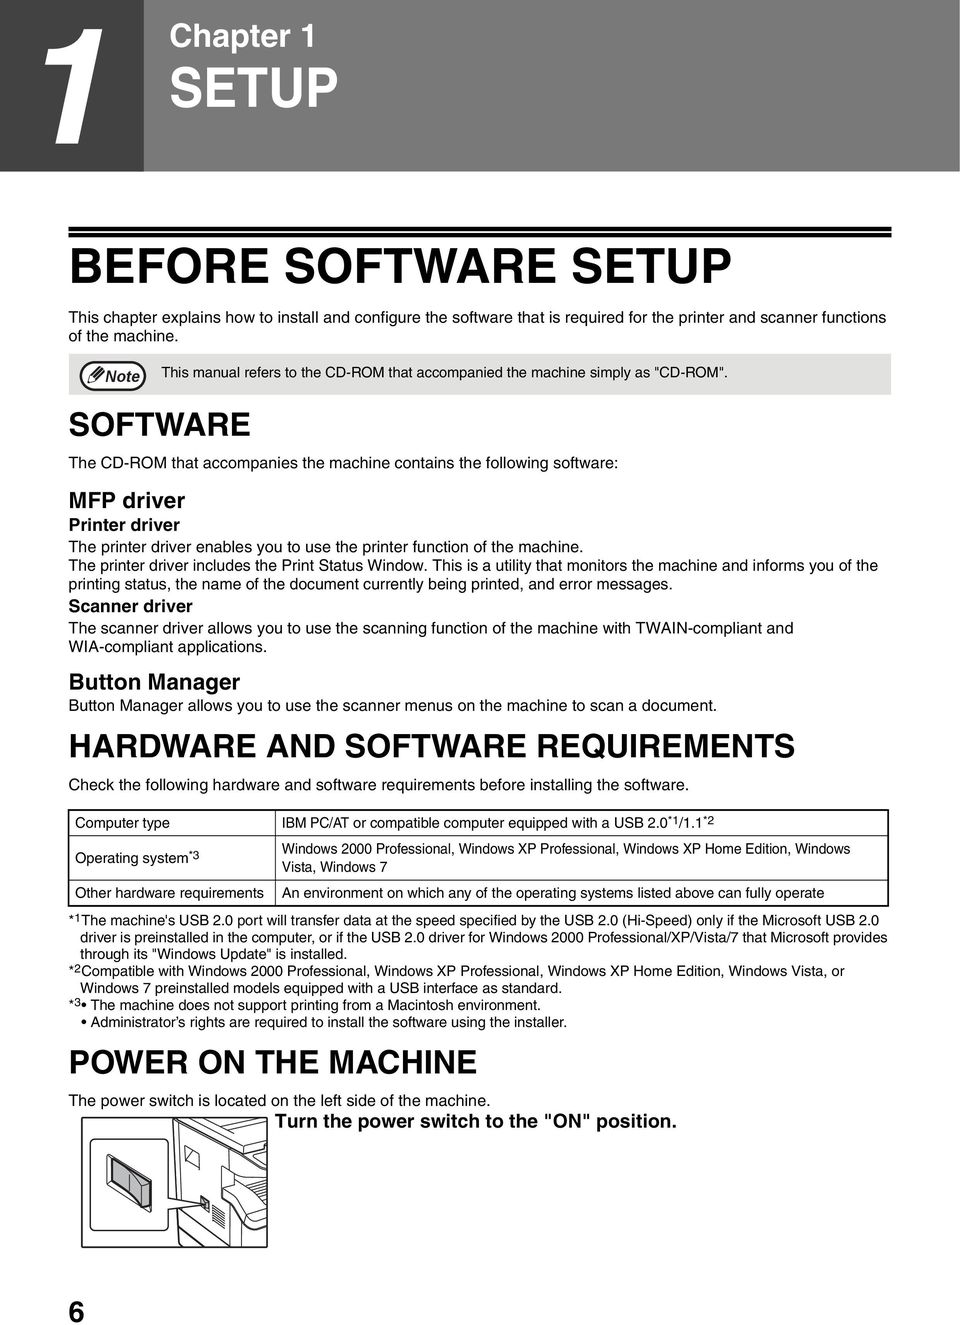 SOFTWARE The CD-ROM that accompanies the machine contains the following software: MFP driver Printer driver The printer driver enables you to use the printer function of the machine.